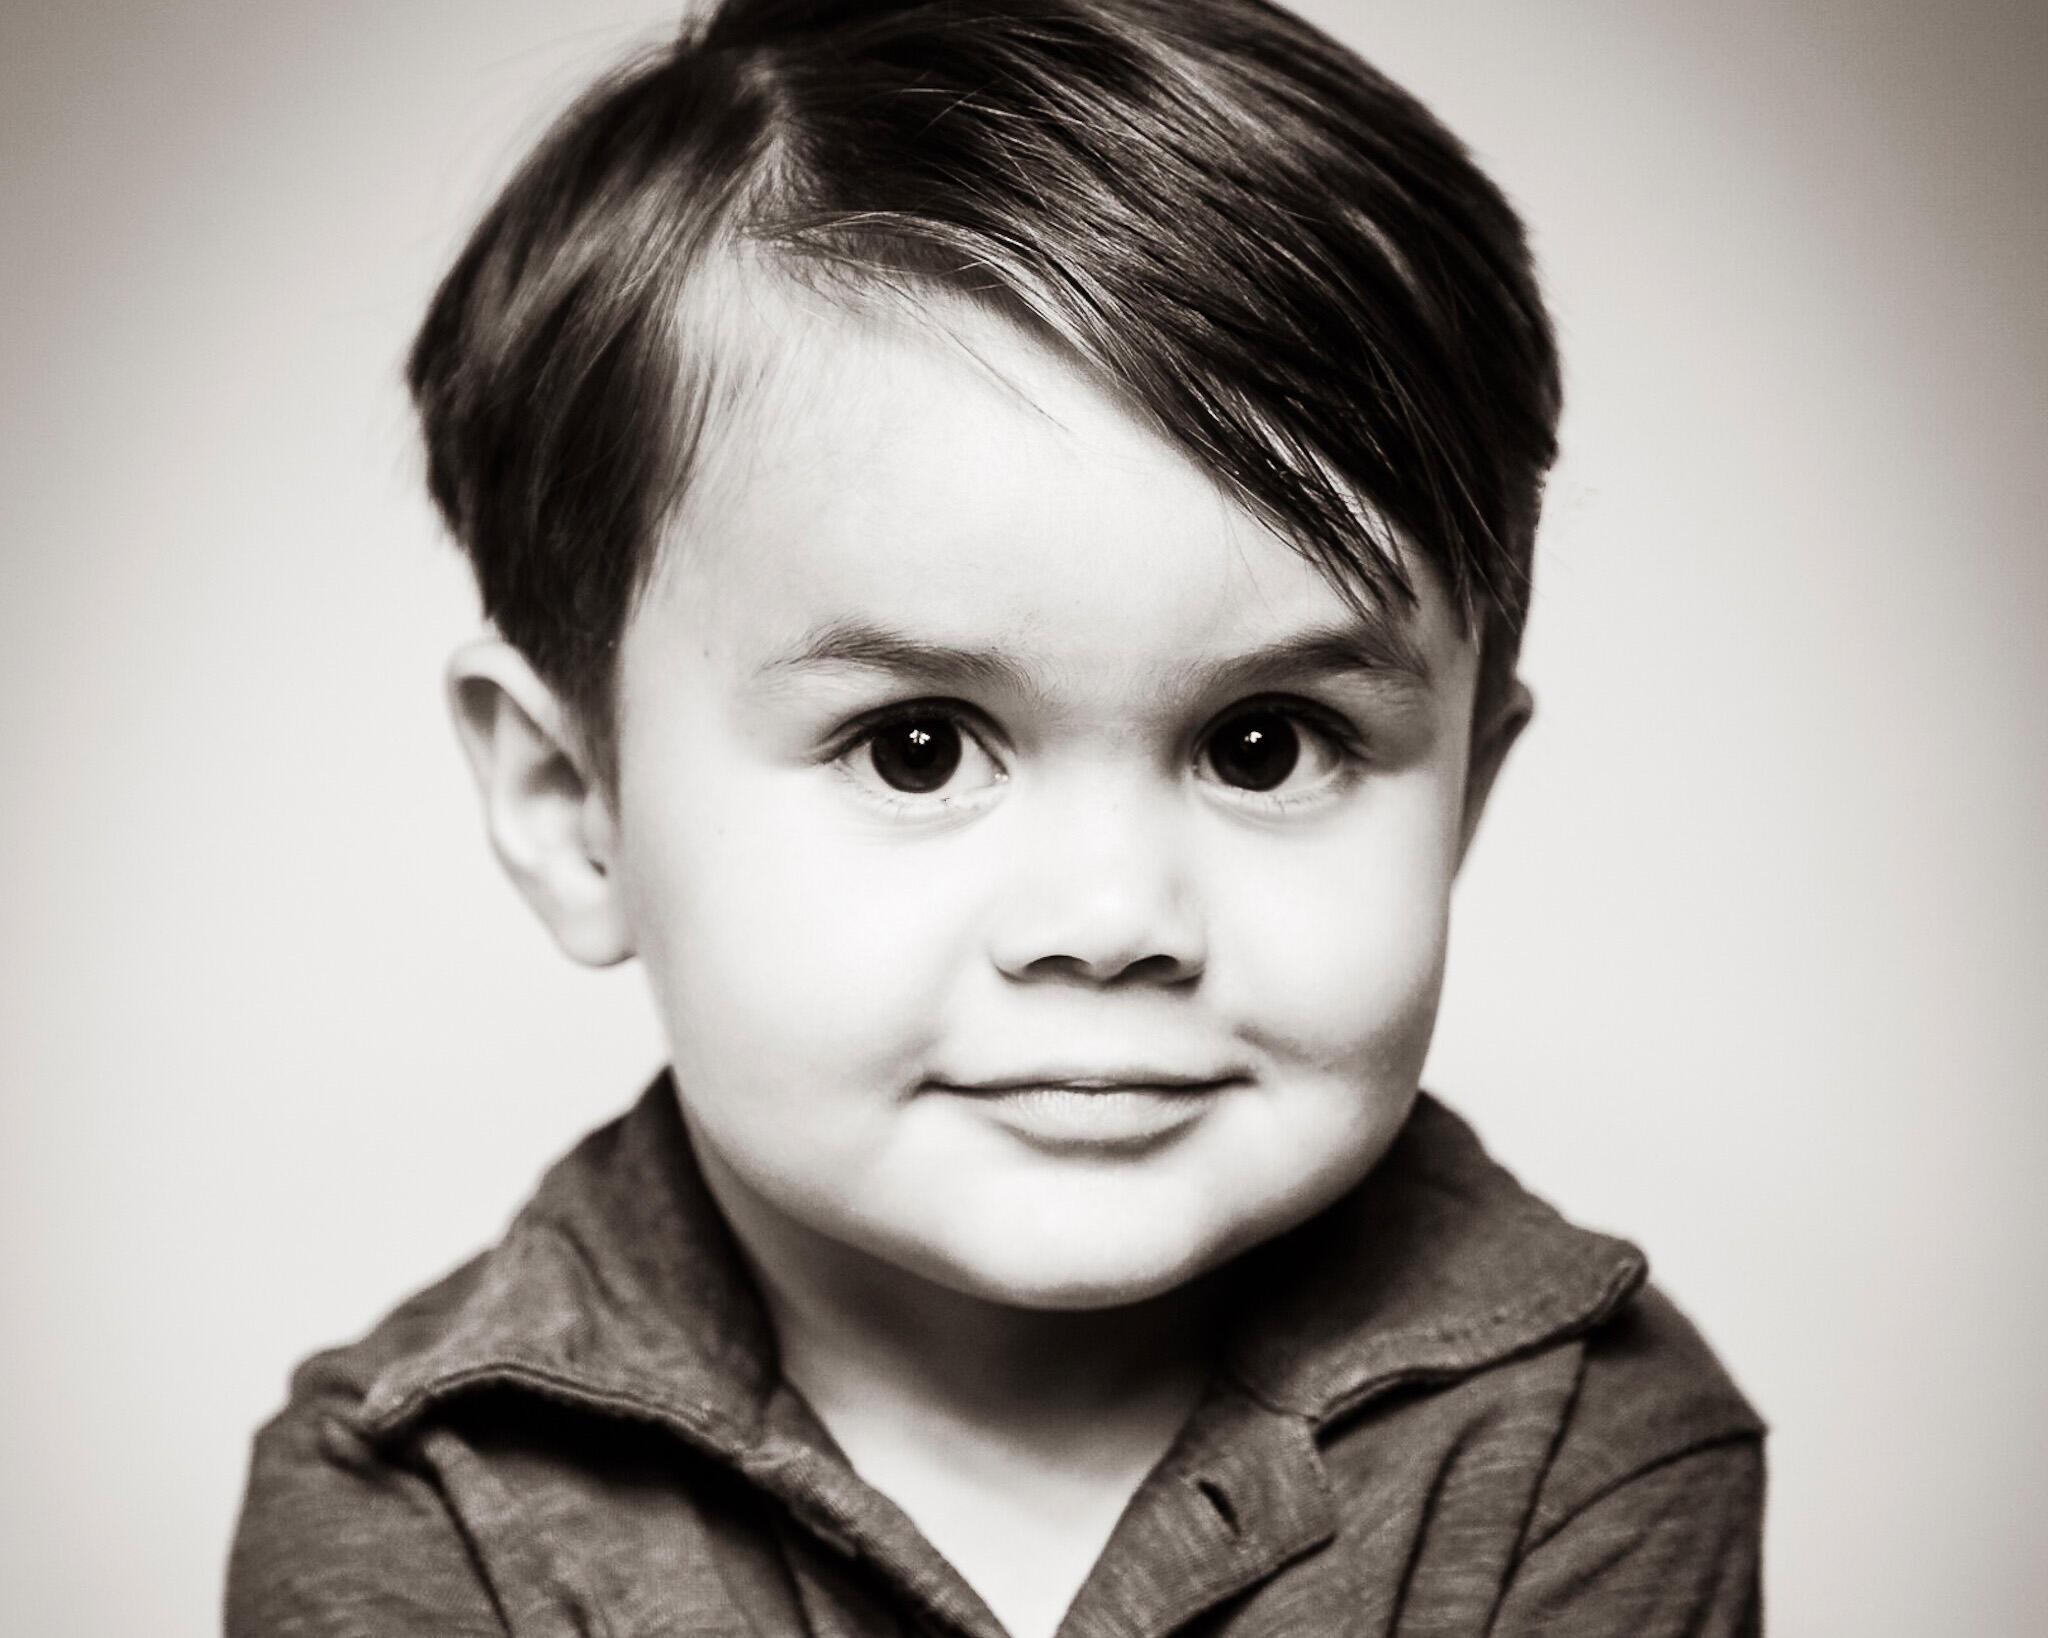 Professional headshot of a Dallas-based child actor.